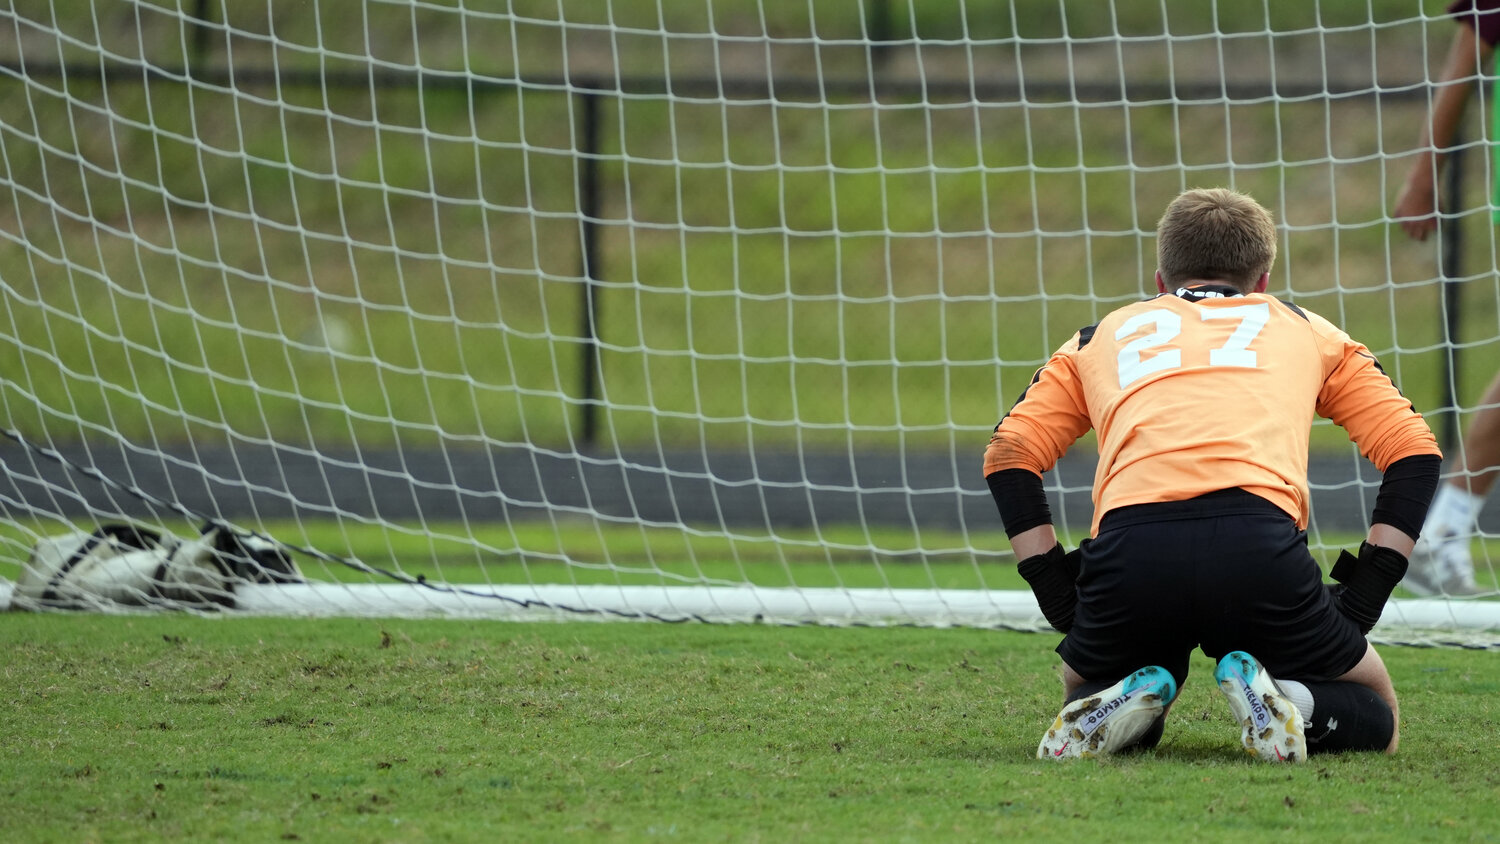 Seaforth goalkeeper Jack Haste looks through the back of his net during the Hawks’ 3-1 overtime loss to North Moore.